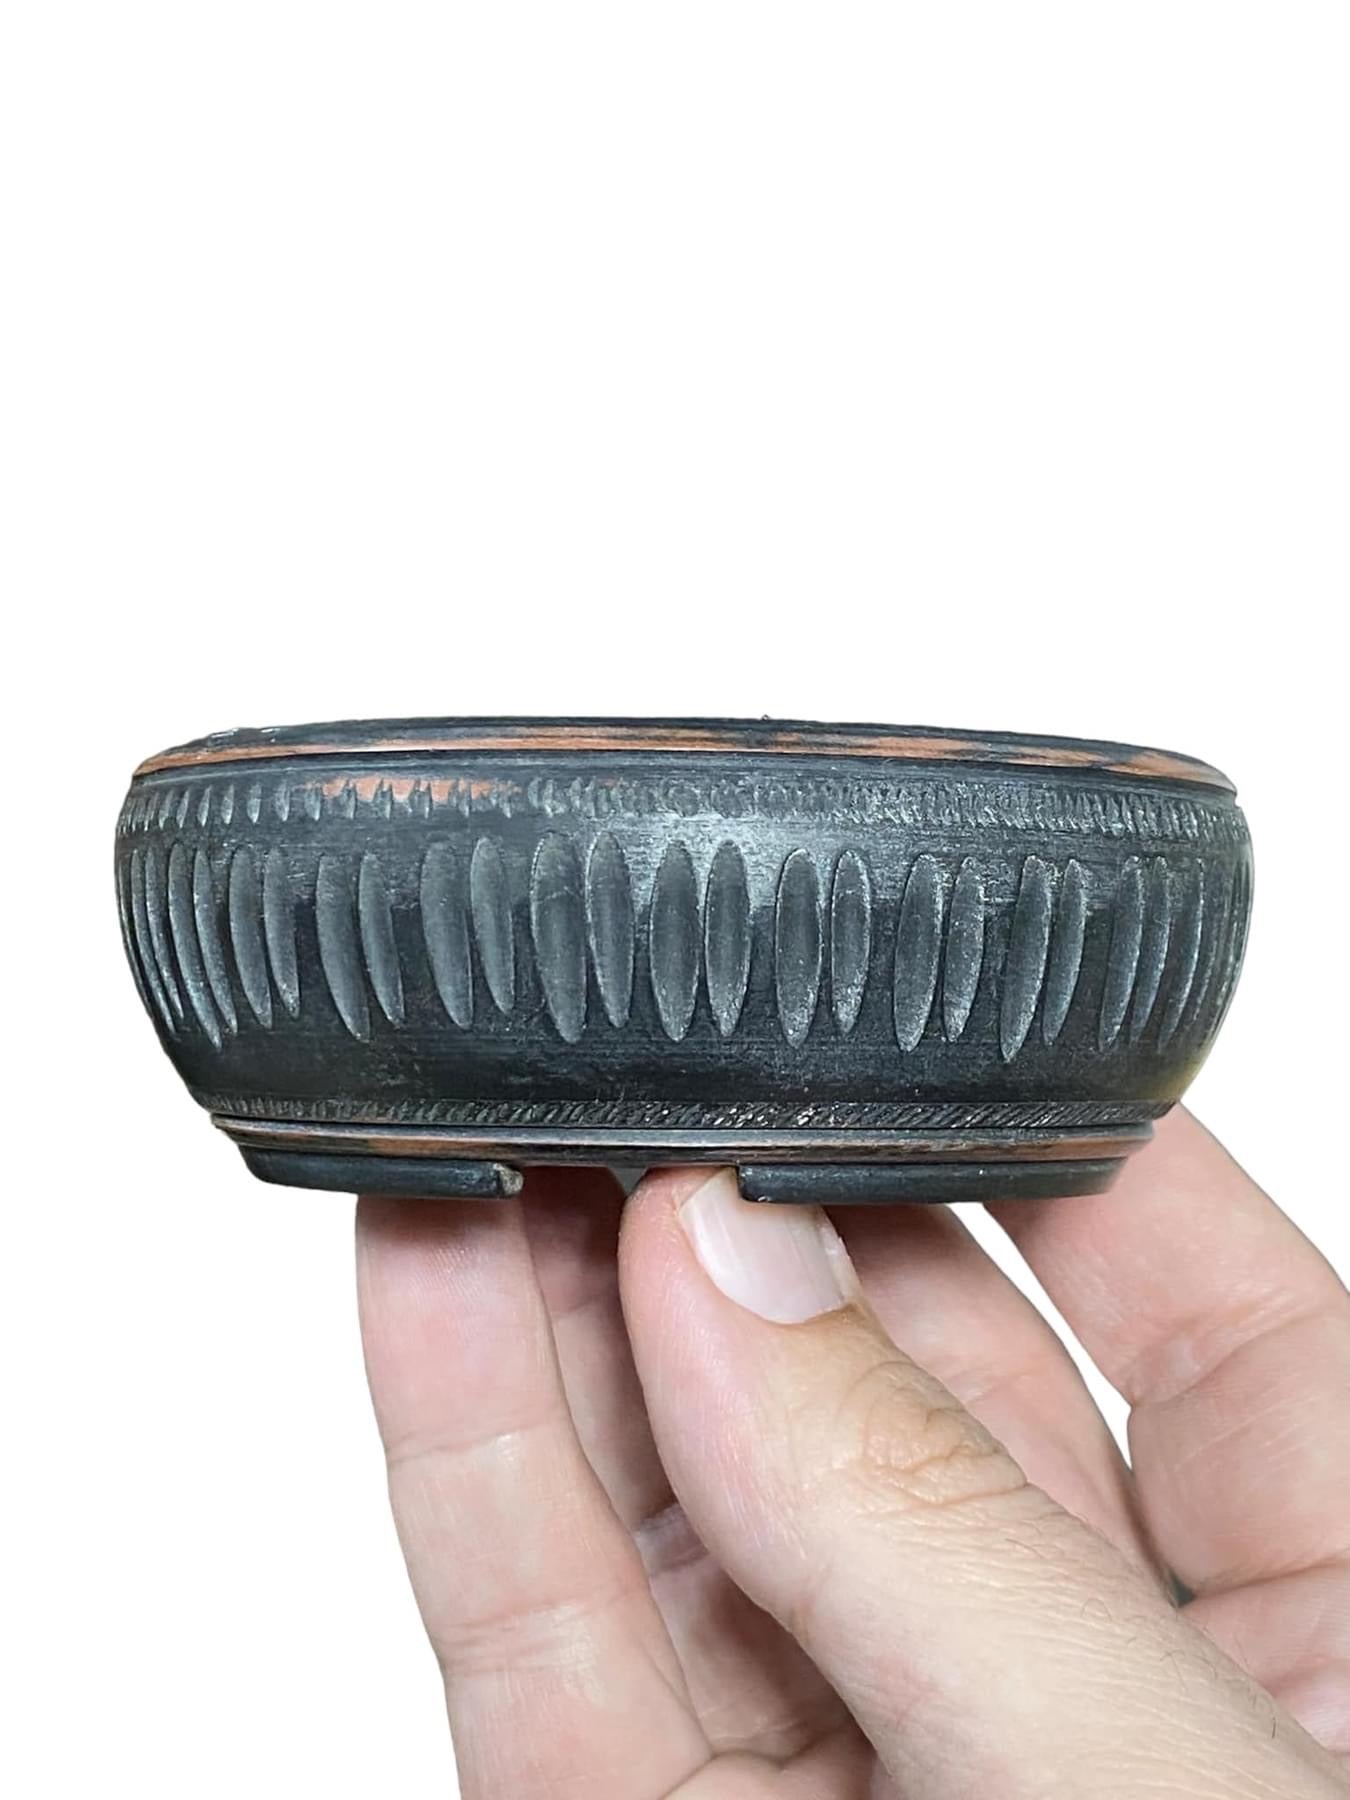 Bigei - Relief Carved Drum Style Bonsai or Accent Pot